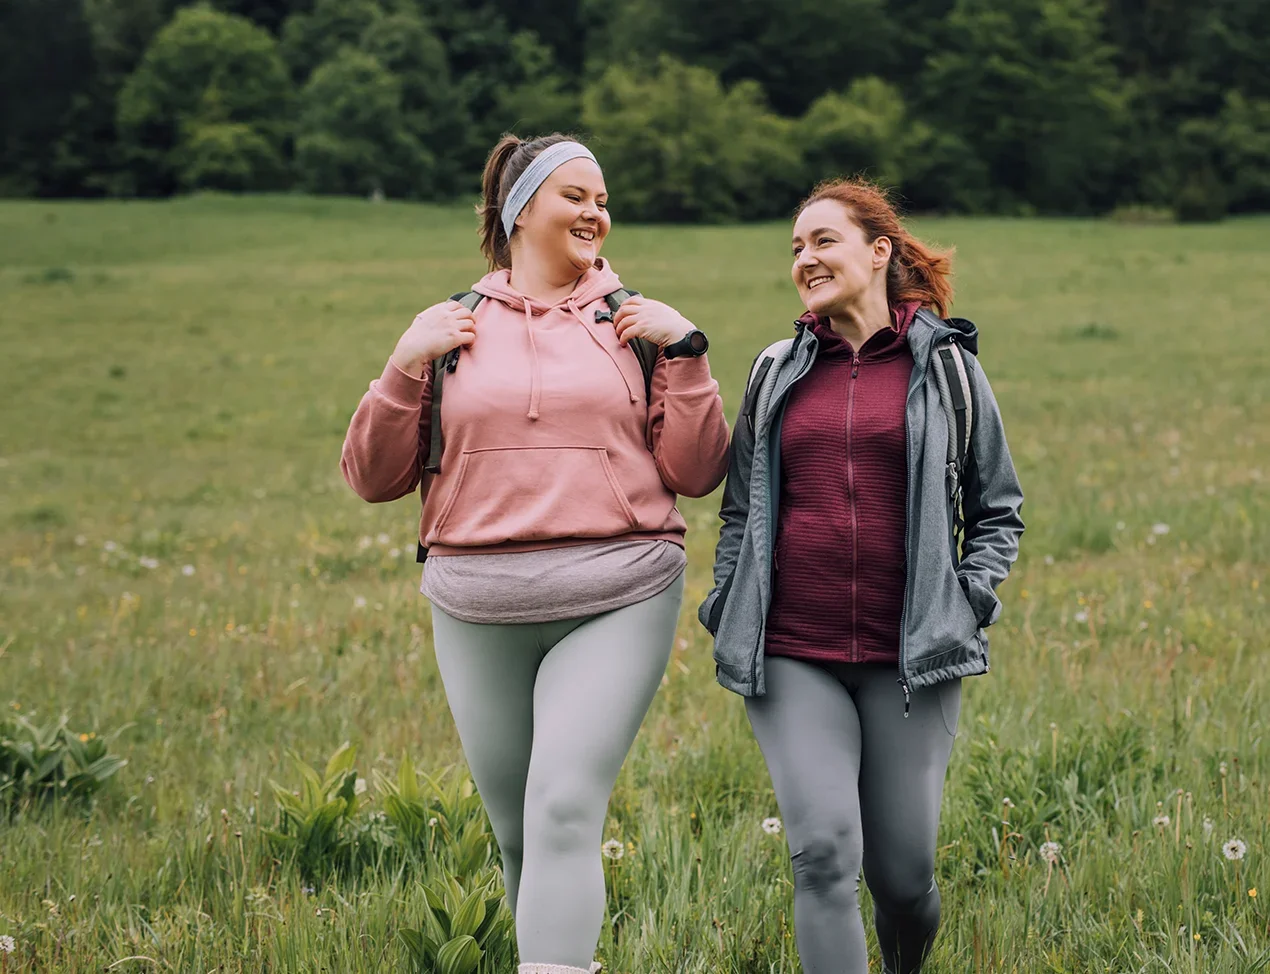 Two friends walk side-by-side as they hike in exercise gear.